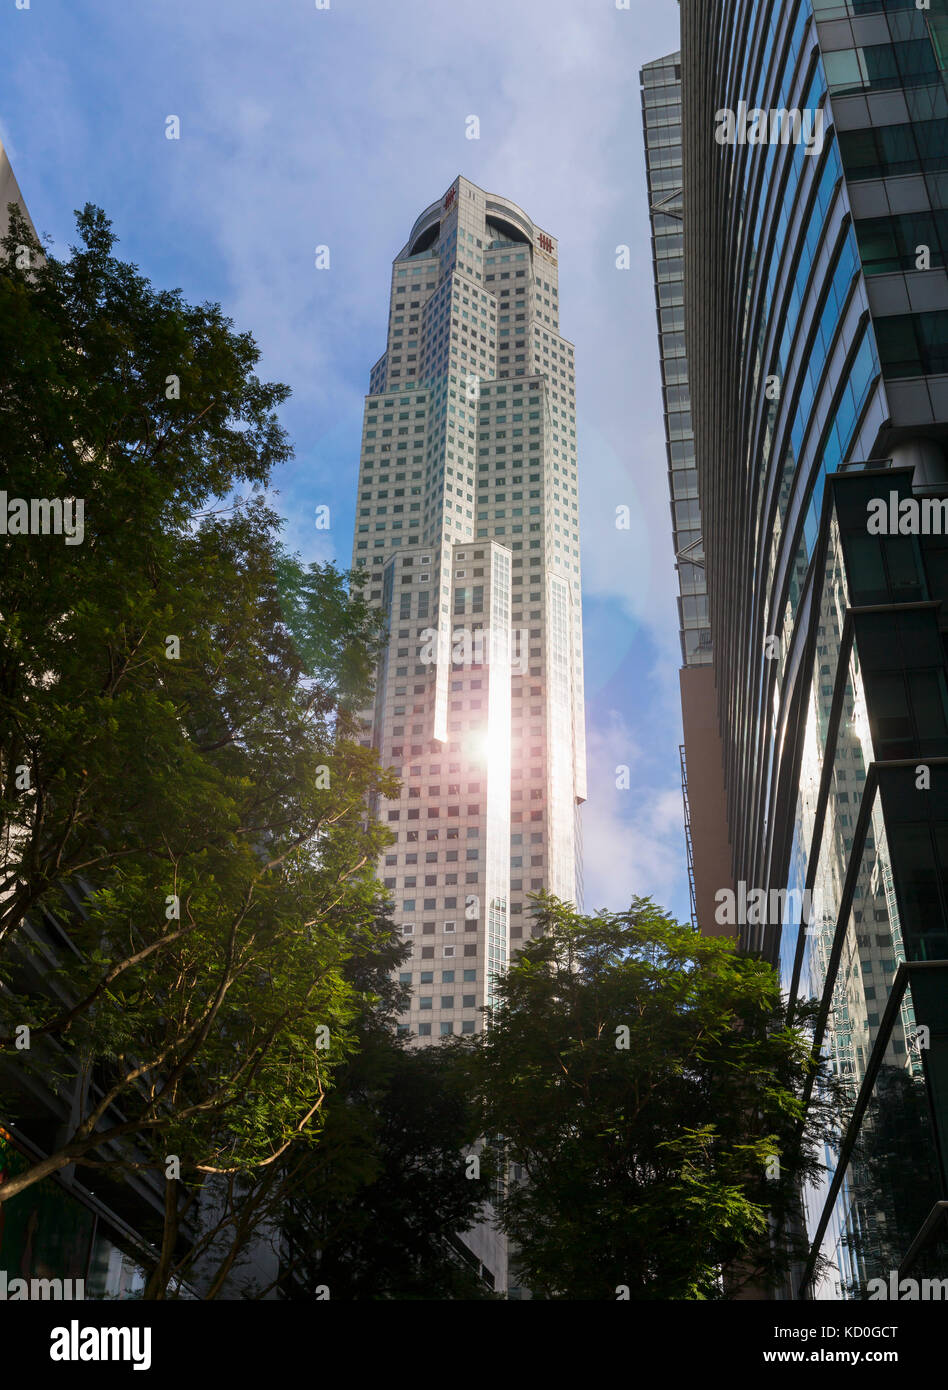 Low angle view of financial district skyscraper, Singapore, South East Asia Stock Photo